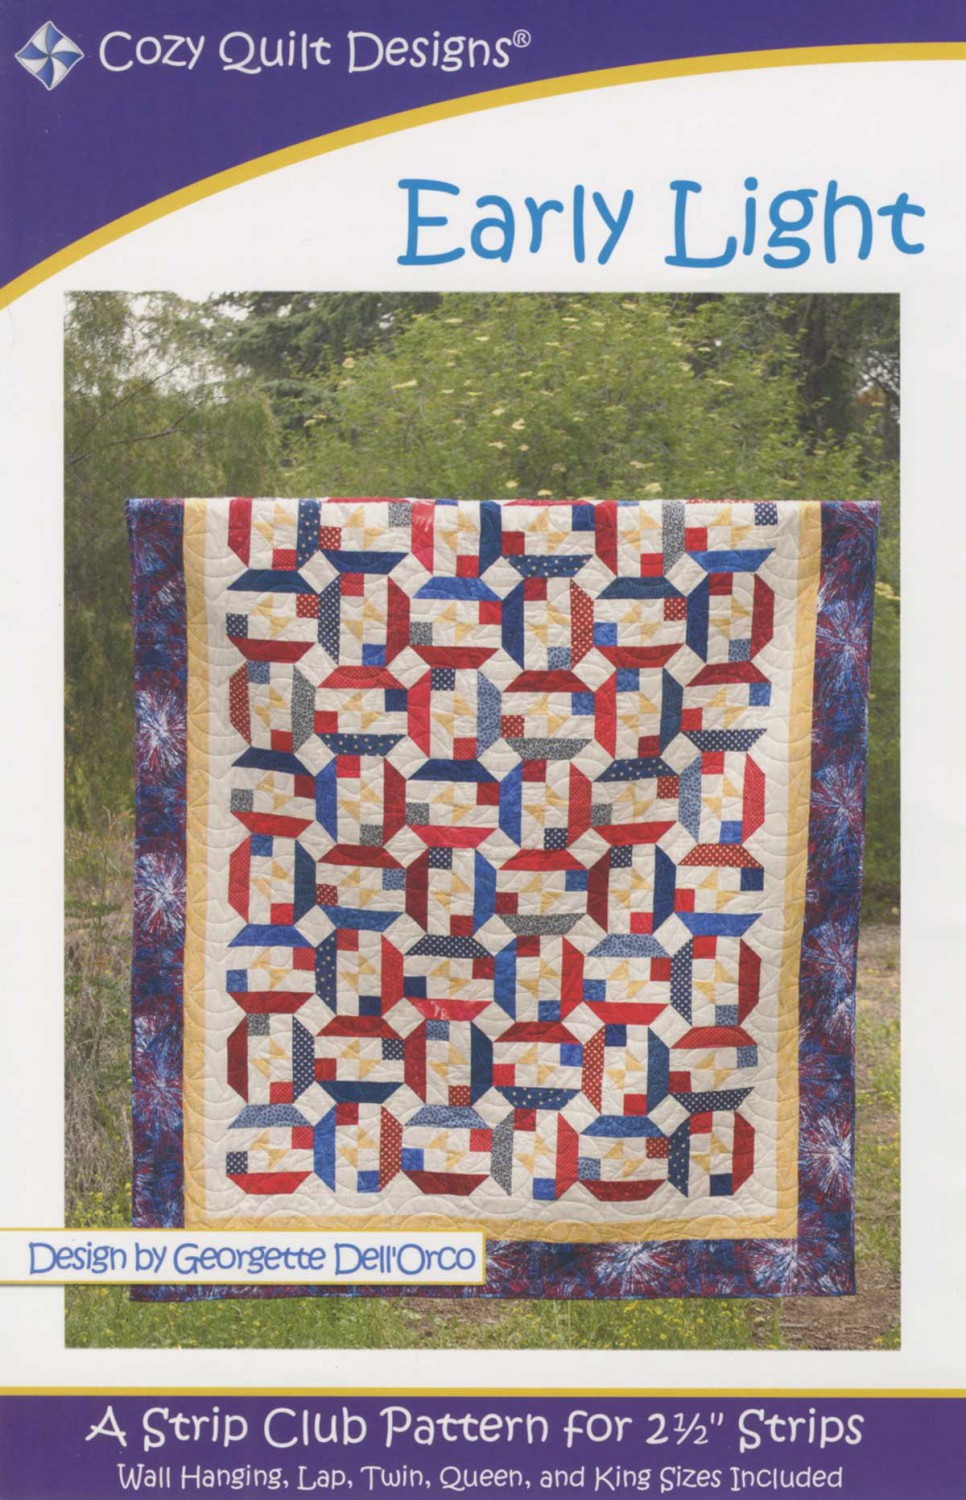 Cozy Quilt Designs Early Light Quilt Pattern